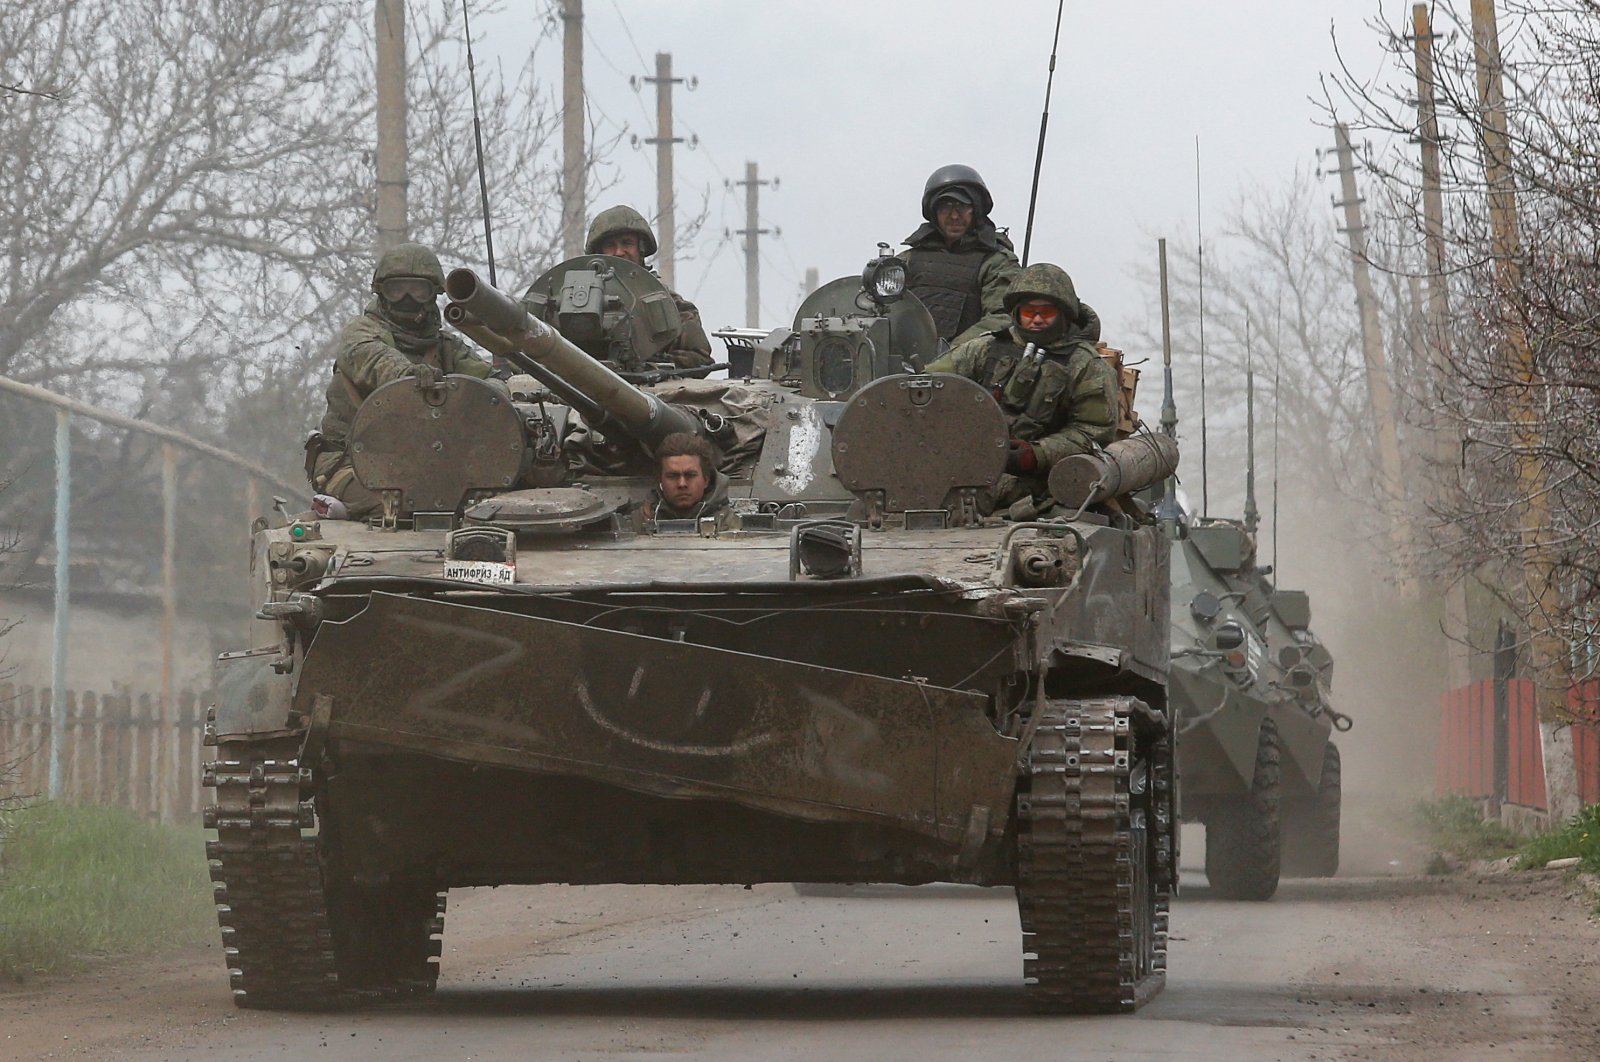 Russian forces sit atop of an armored vehicle during the Russian invasion, in Mariupol, Ukraine, April 17, 2022. (Reuters Photo)